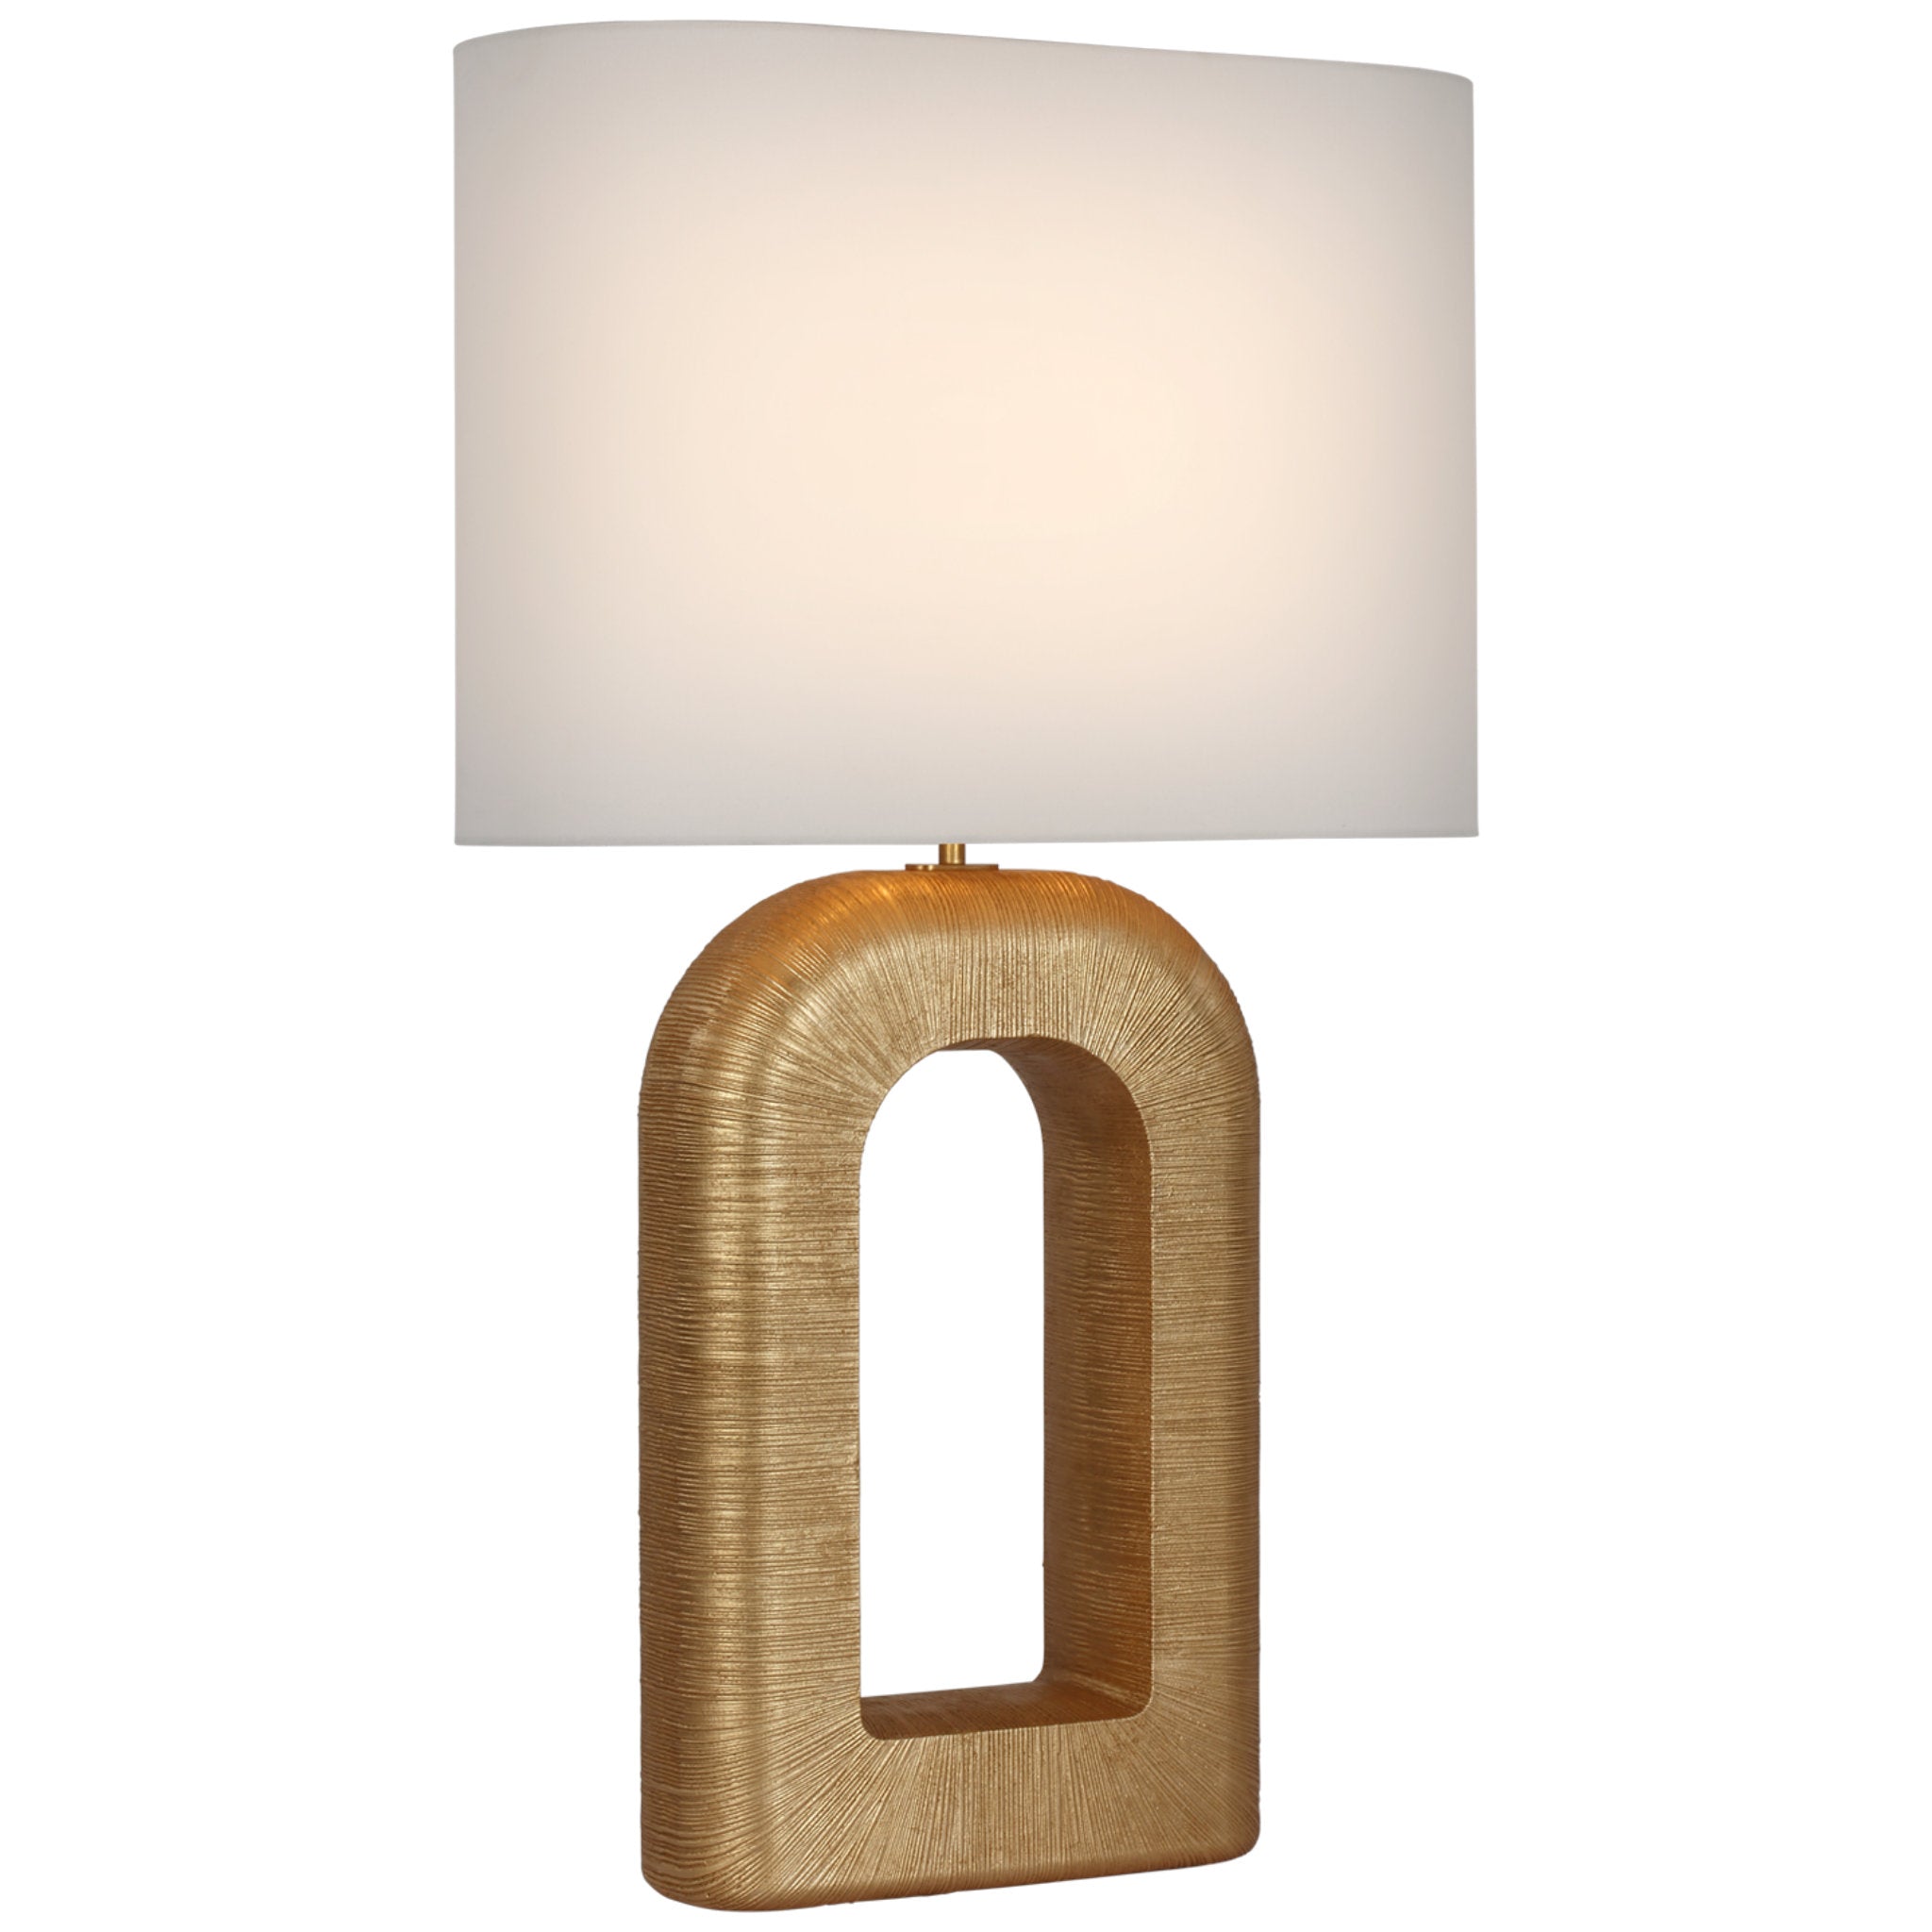 Kelly Wearstler Utopia Large Combed Table Lamp in Gild with Linen Shade